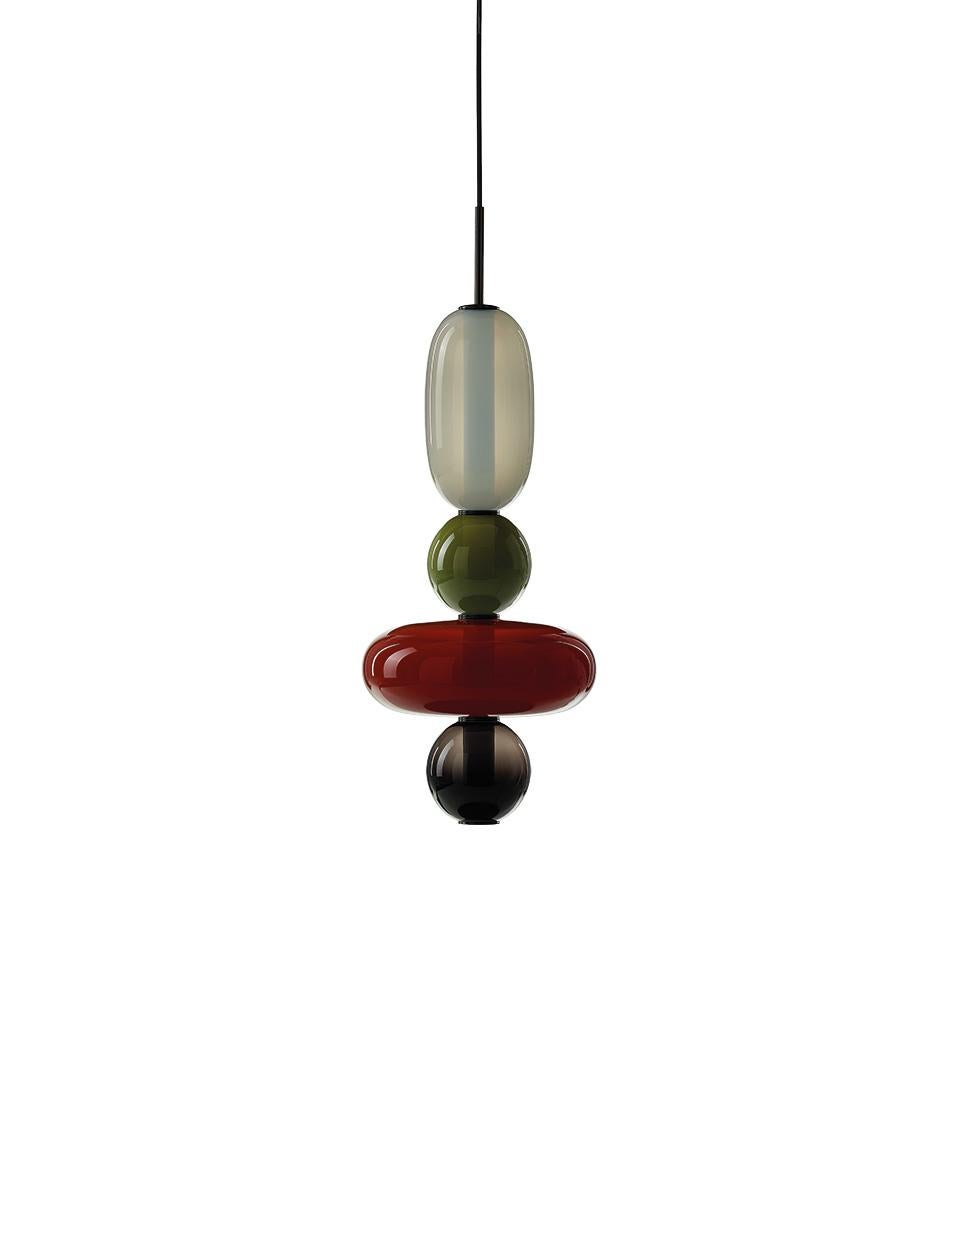 Contemporary Blown Crystal Glass Pendant - Pebbles by Boris Klimek for Bomma

Pebbles are reminders of exceptional moments or favorite places. Their diverse shapes and colors inspired BOMMA’s playful collection that invites you to express your